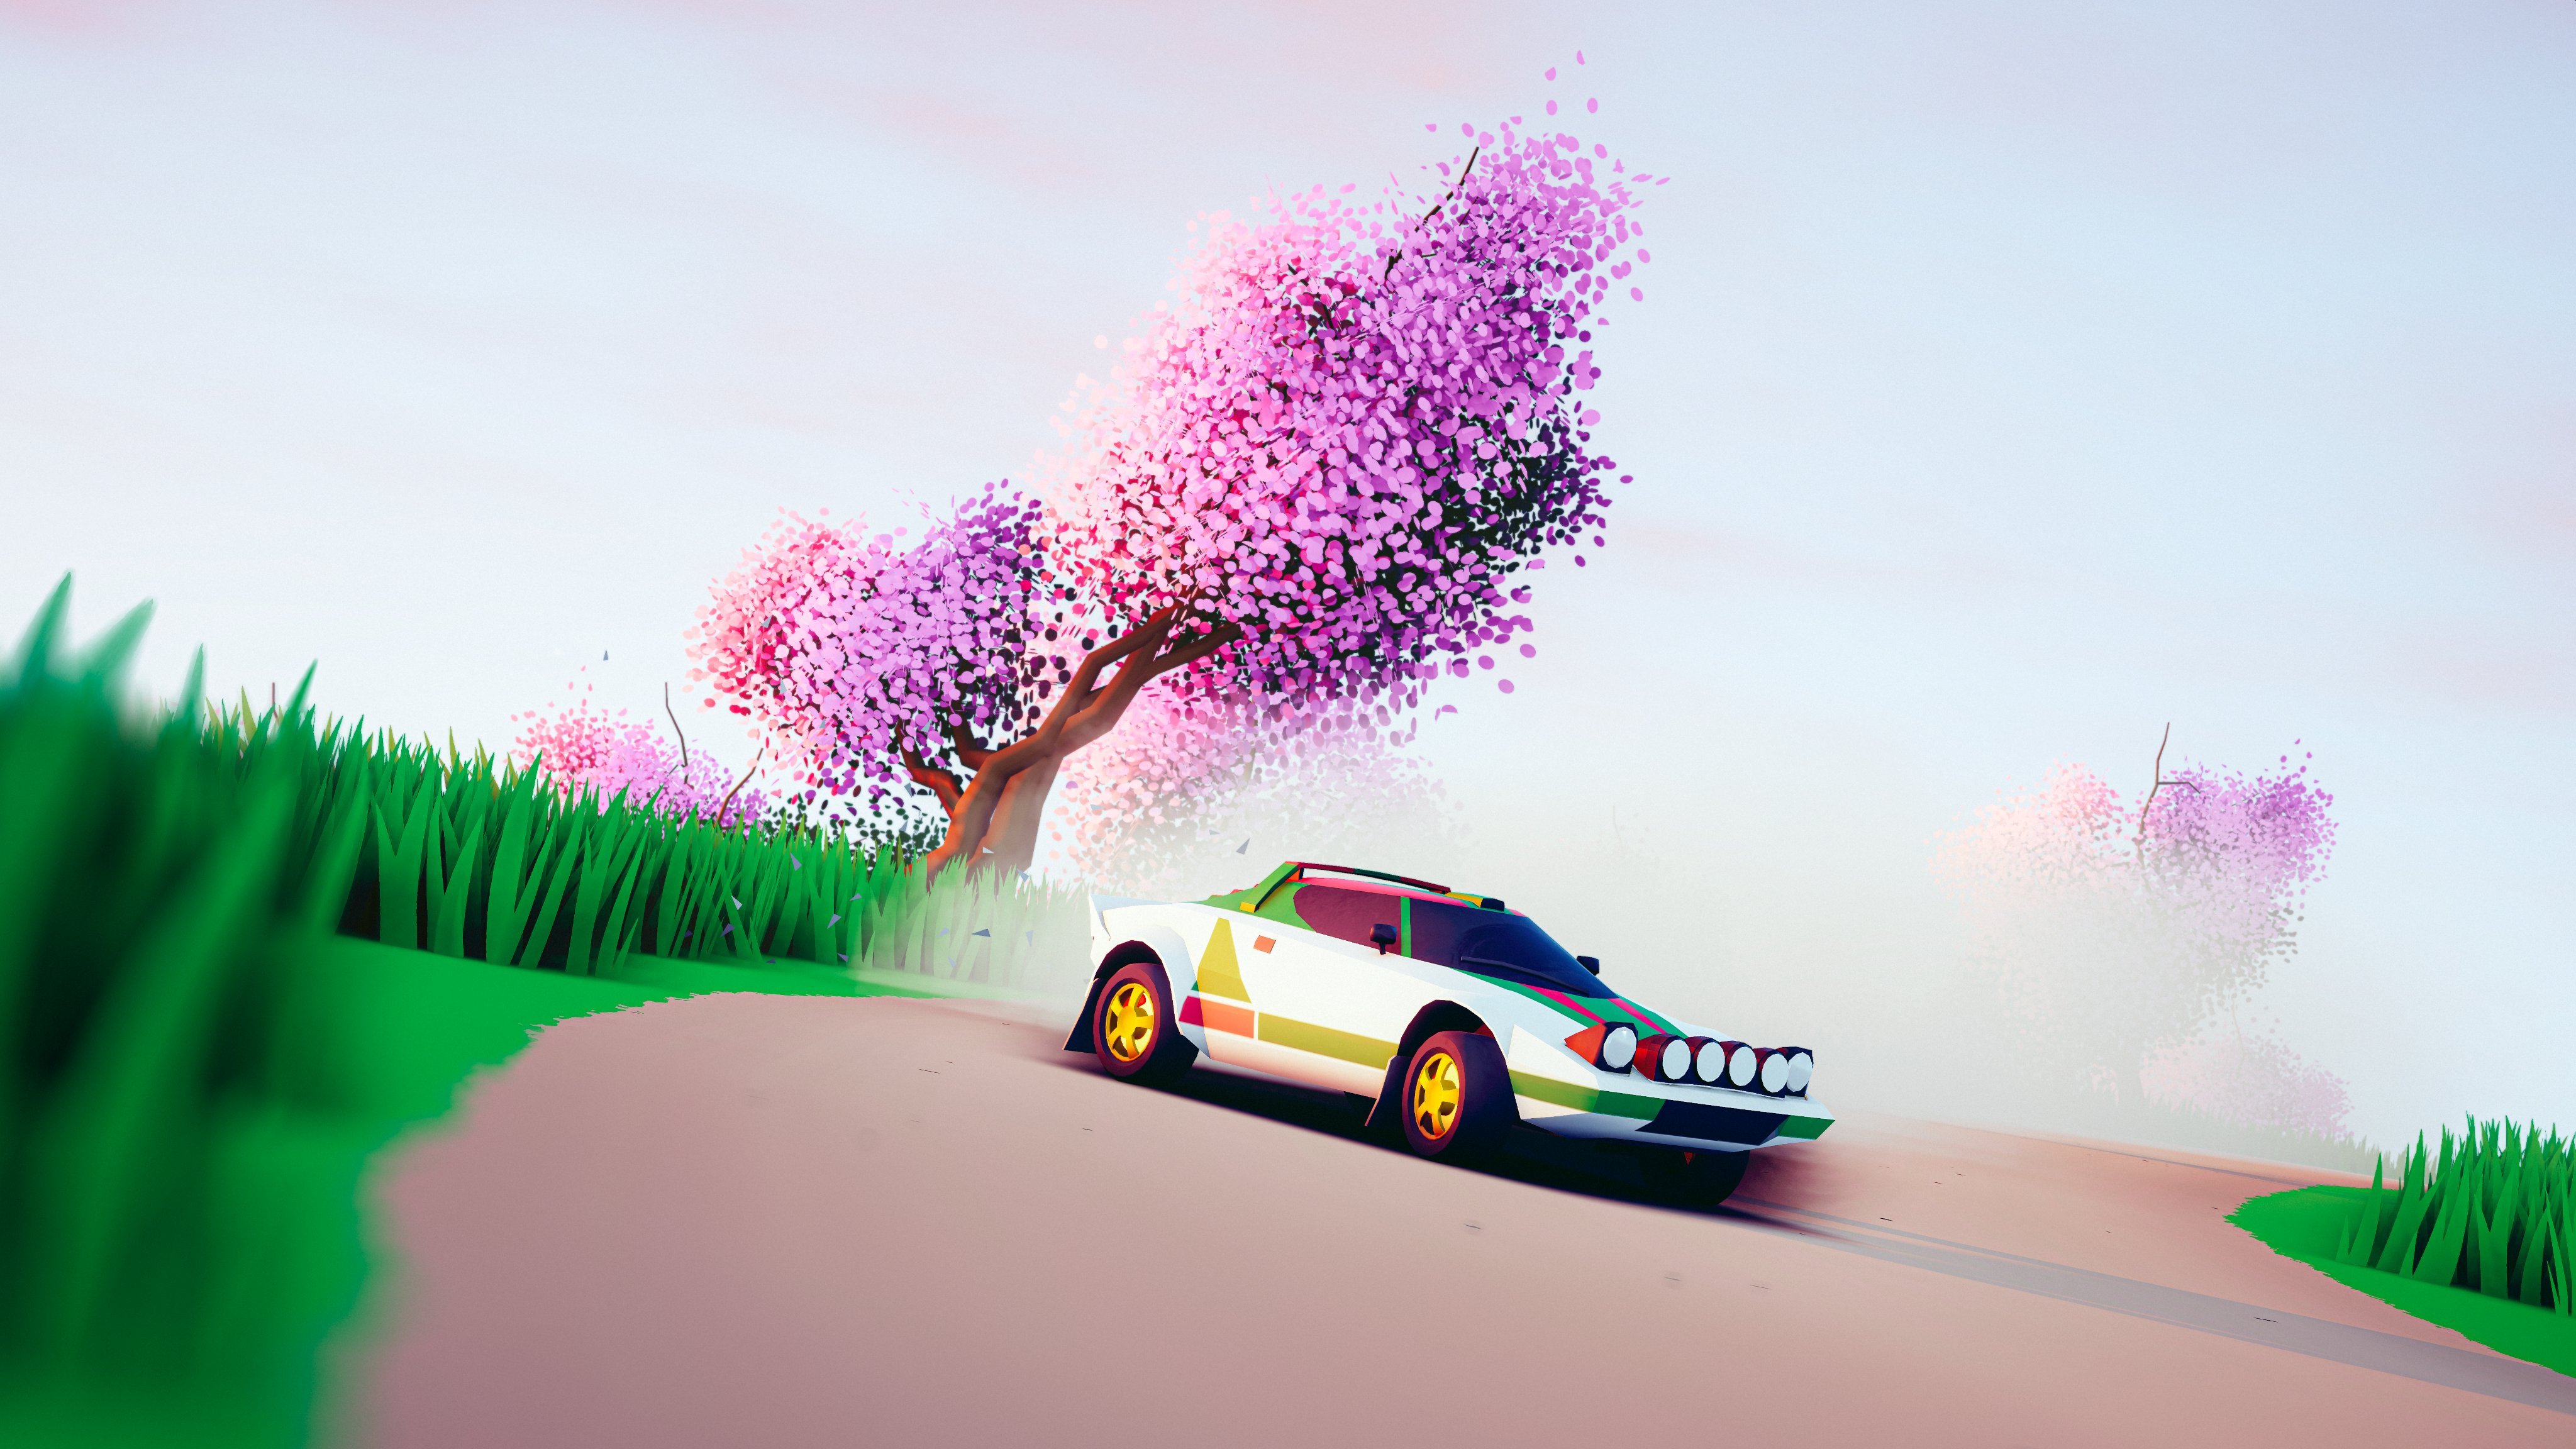 art of rally review